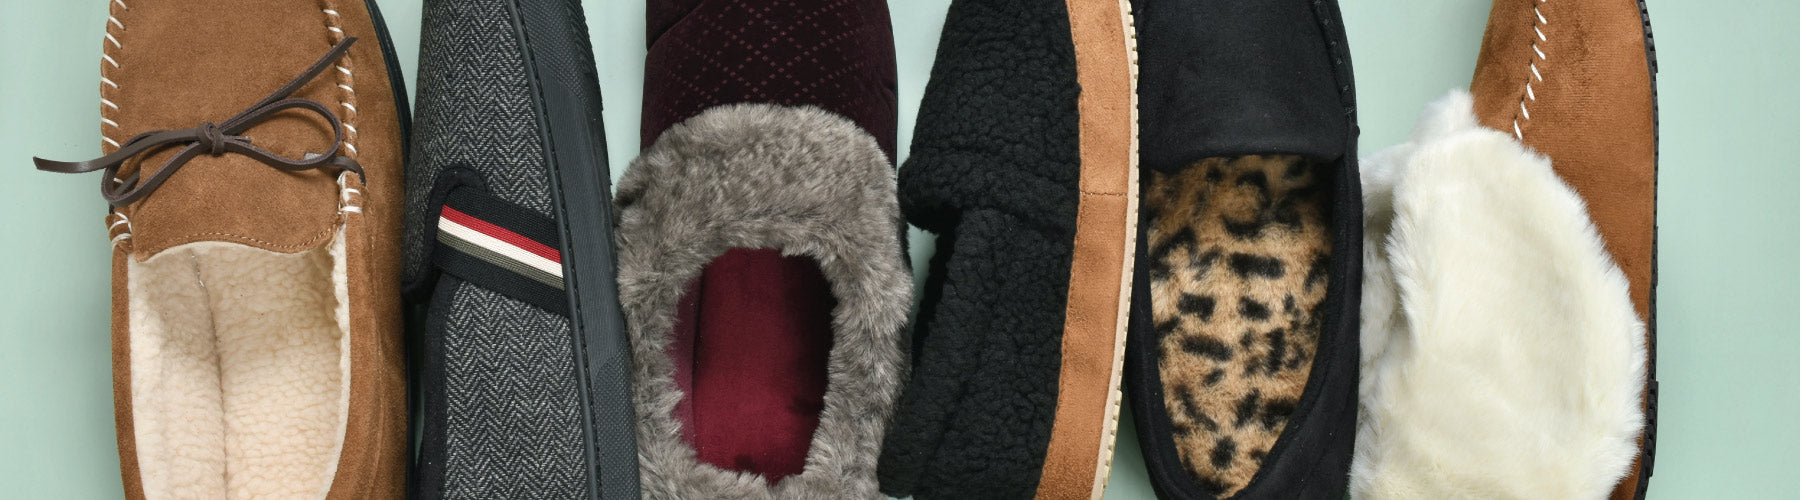 Flatlay of Men's and Women's New Arrival Slippers